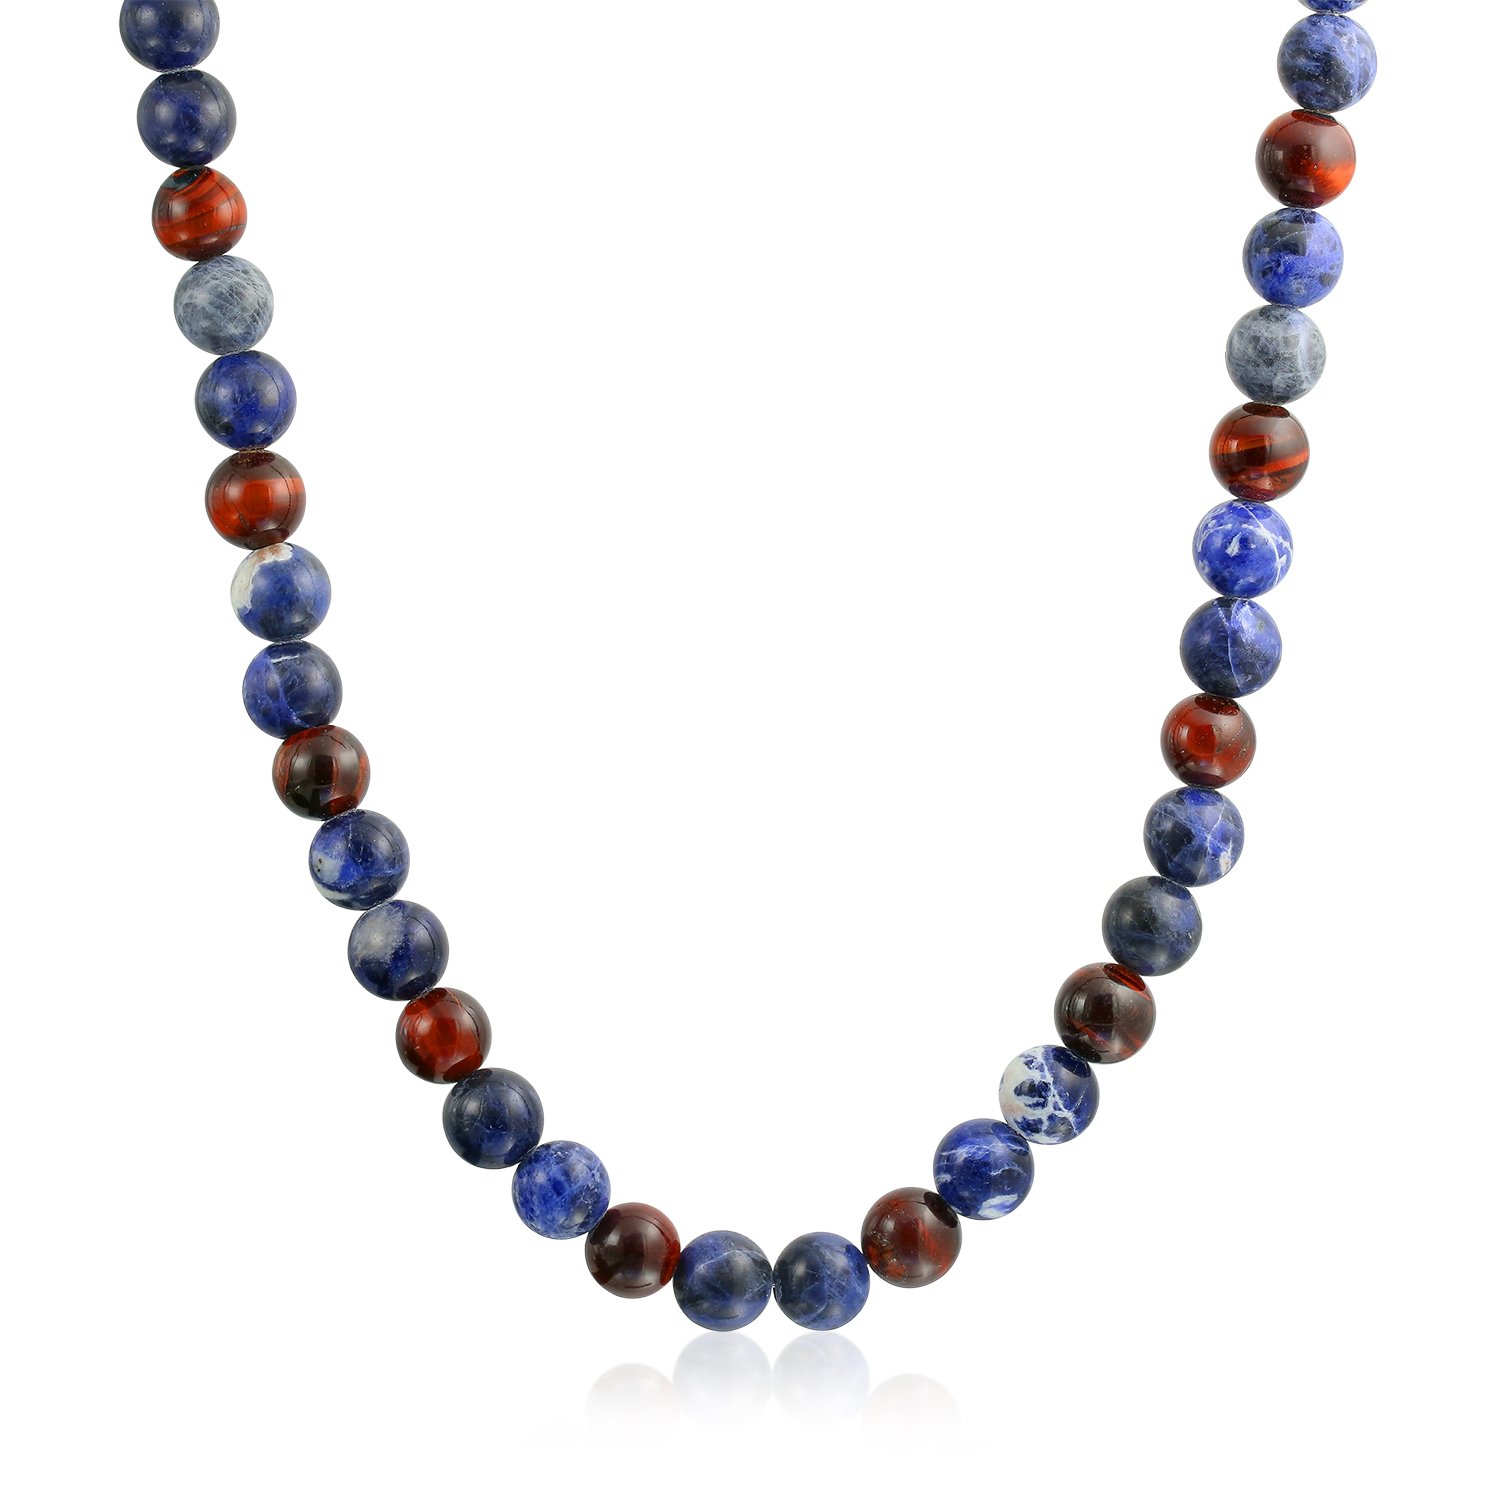 Bali Style Gemstone Blue Sodalite Brown Tiger Eye Ball Bead Strand Necklace For Men Women Stainless Steel Hook Clasp